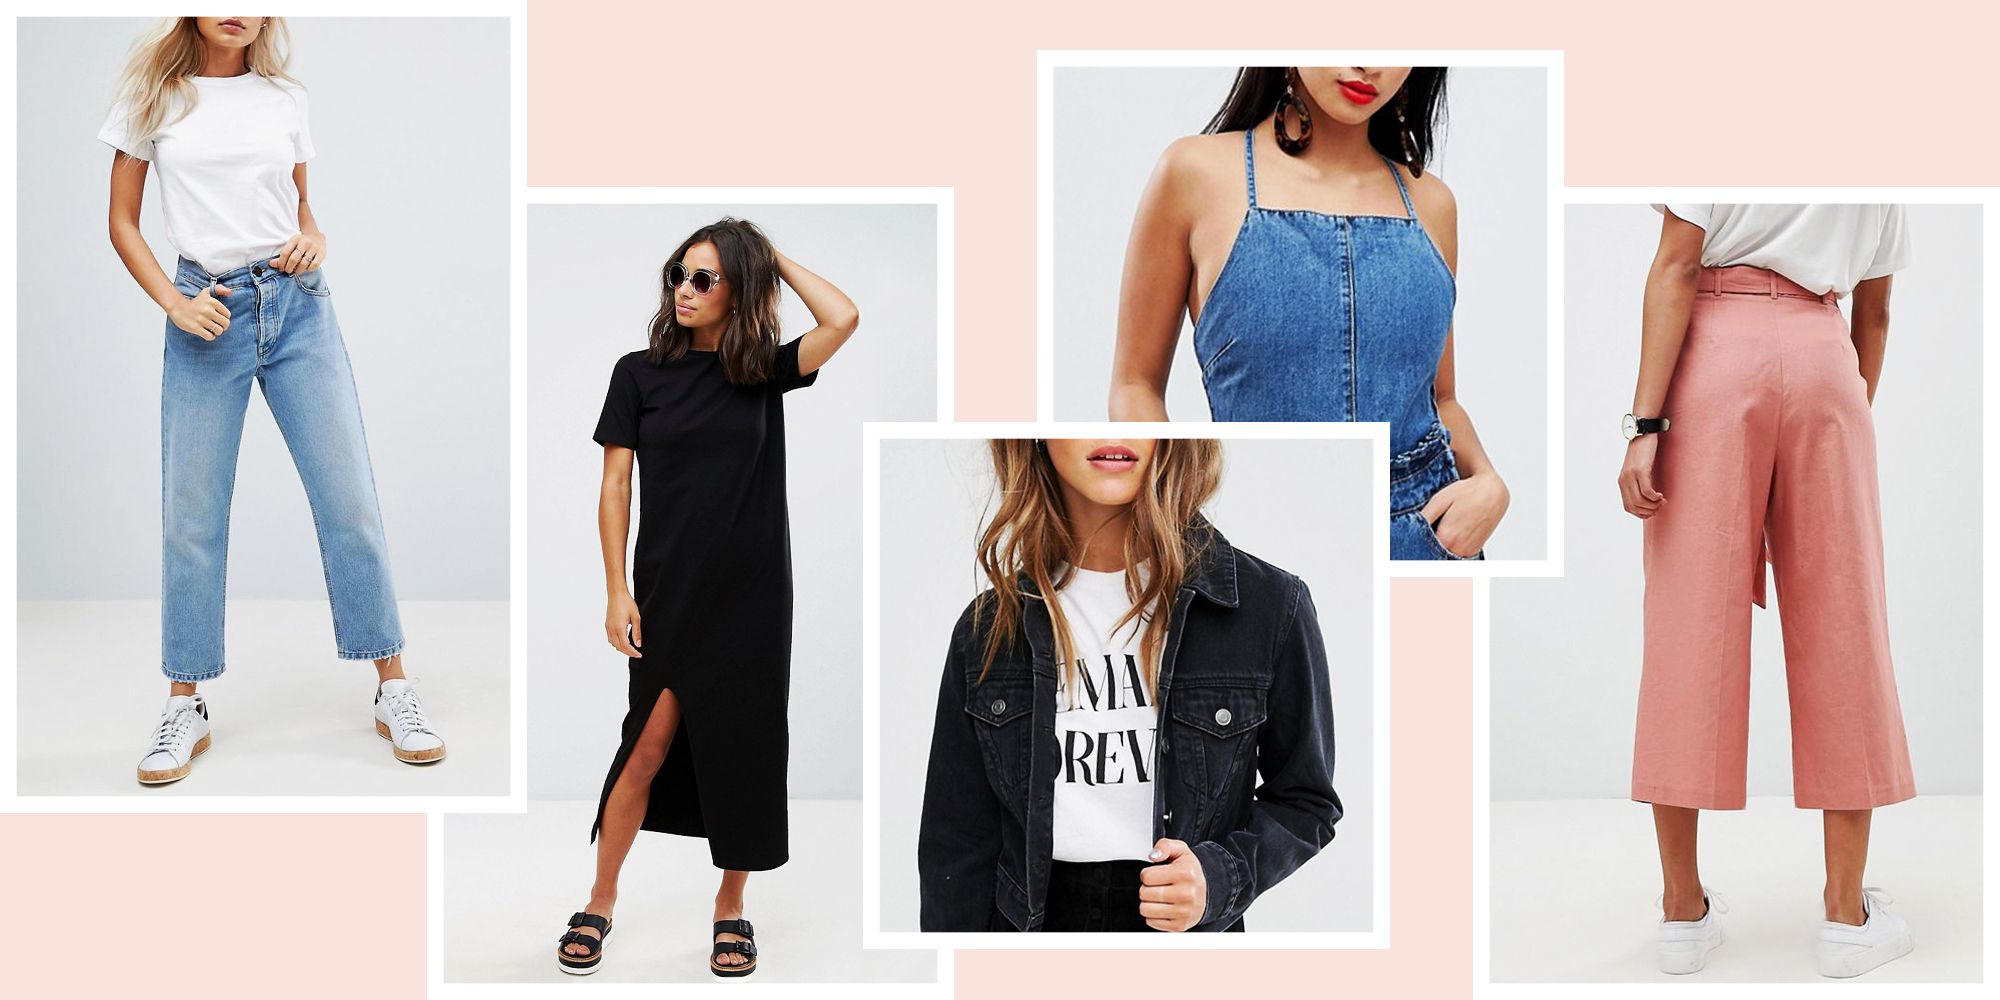 12 Best Petite Clothing Stores in 2018 - Where to Buy Trendy